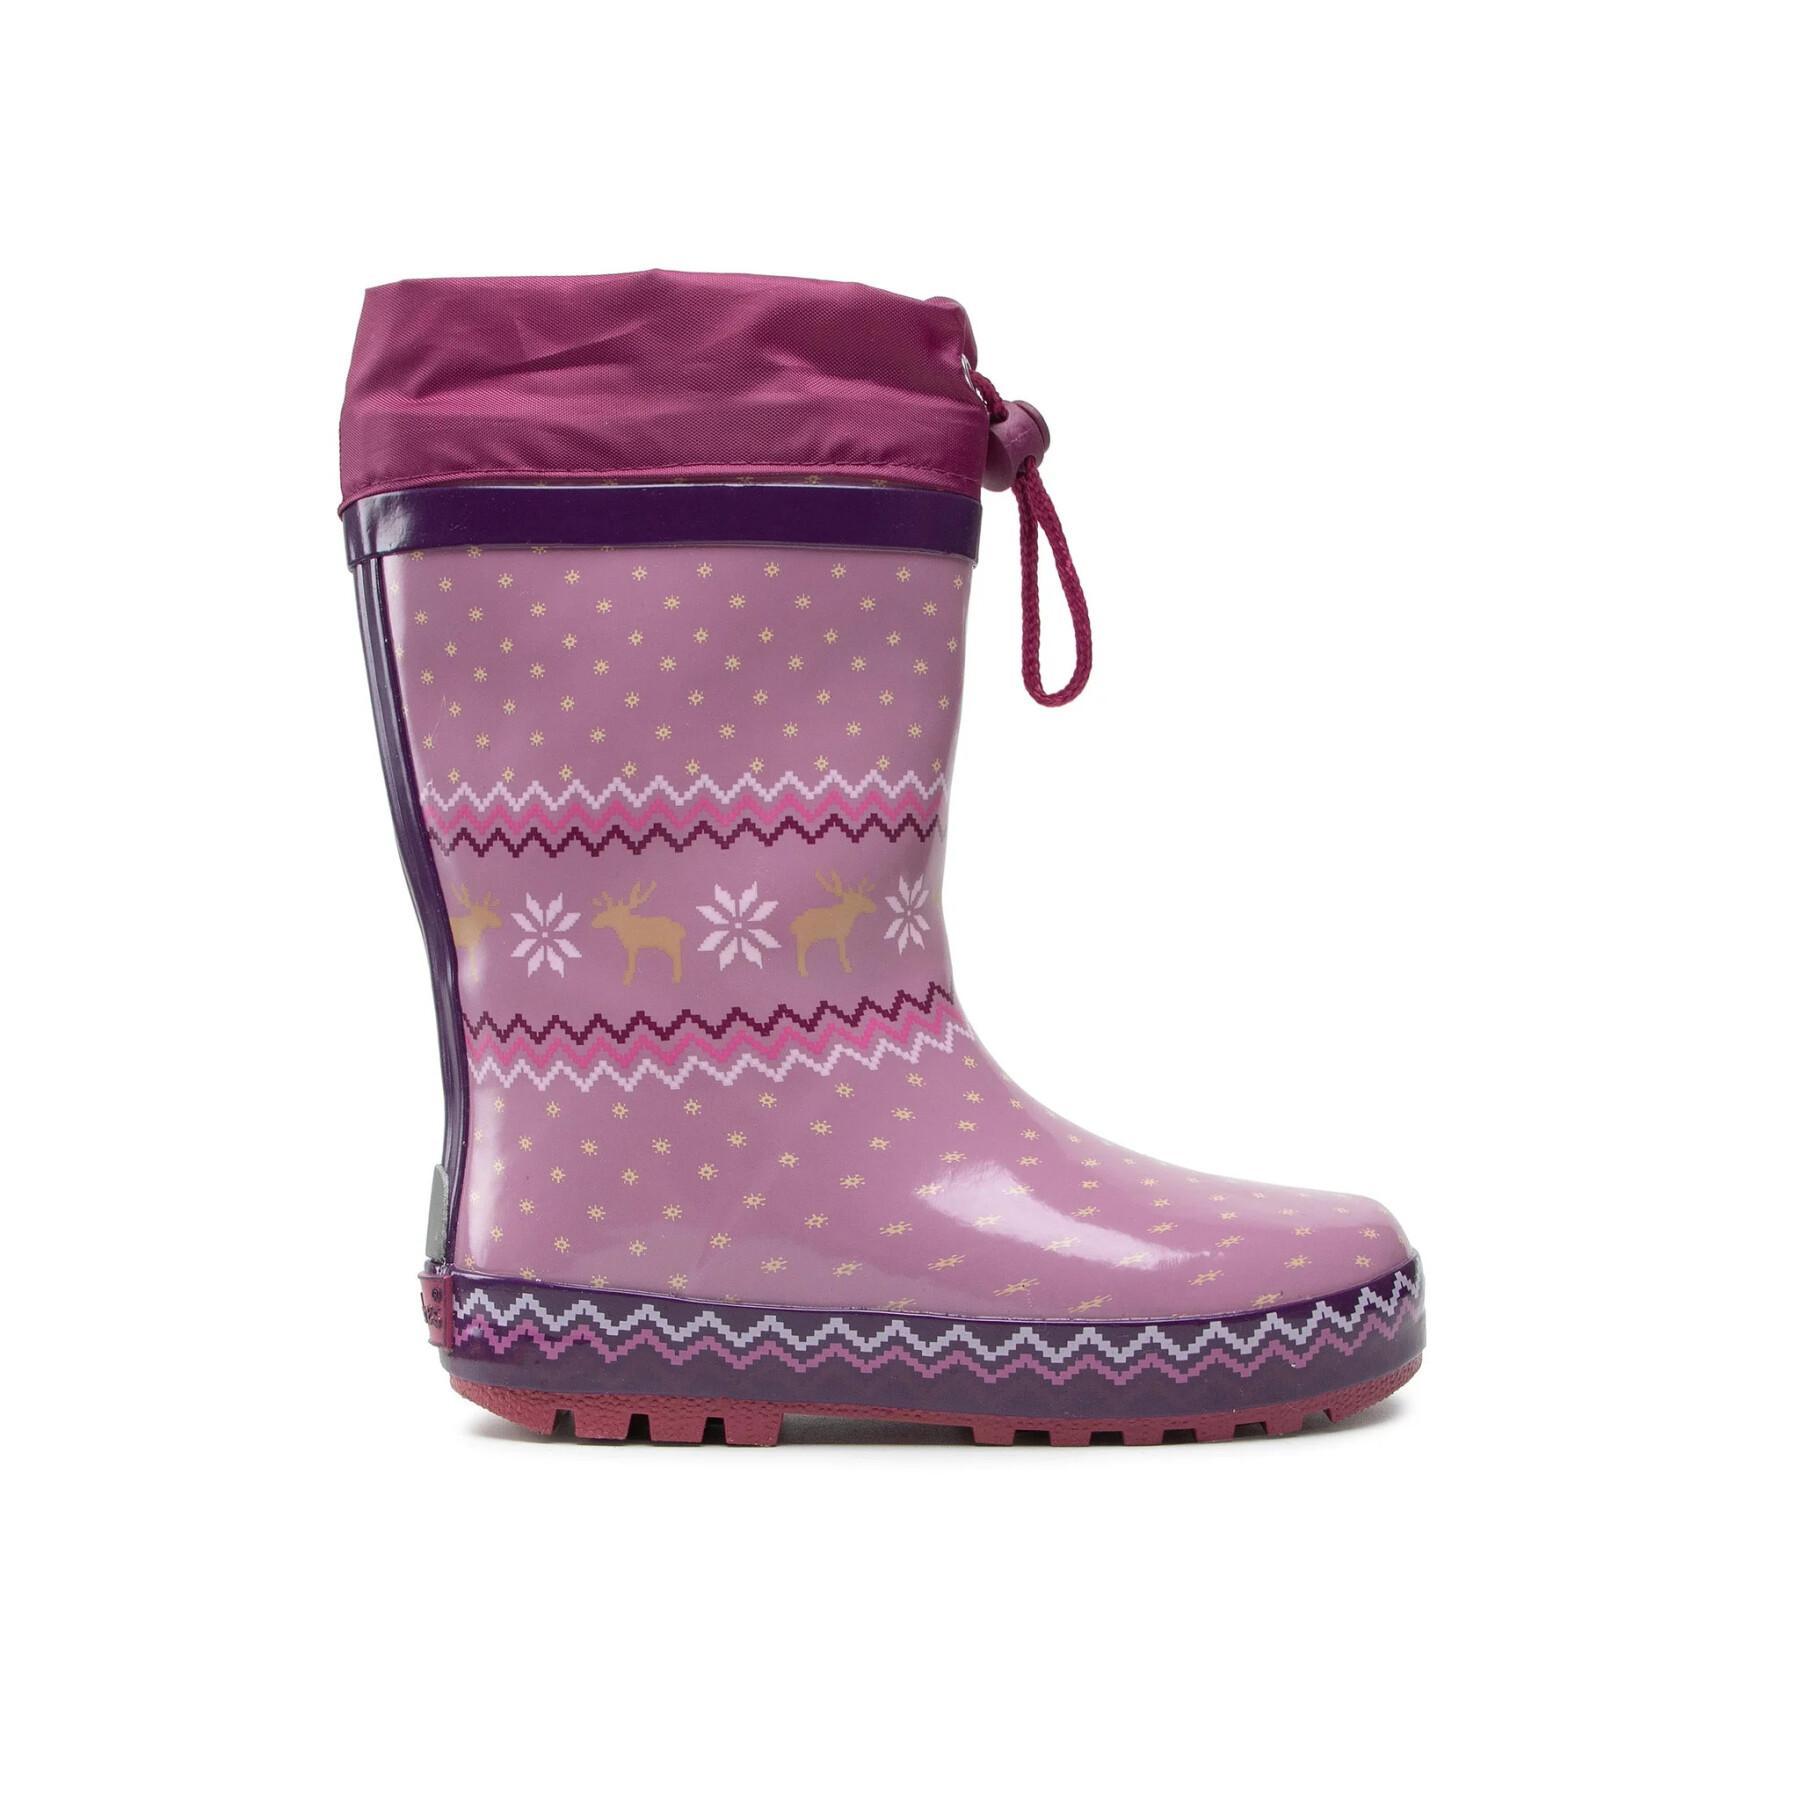 Children's rubber rain boots Playshoes Norway Lined